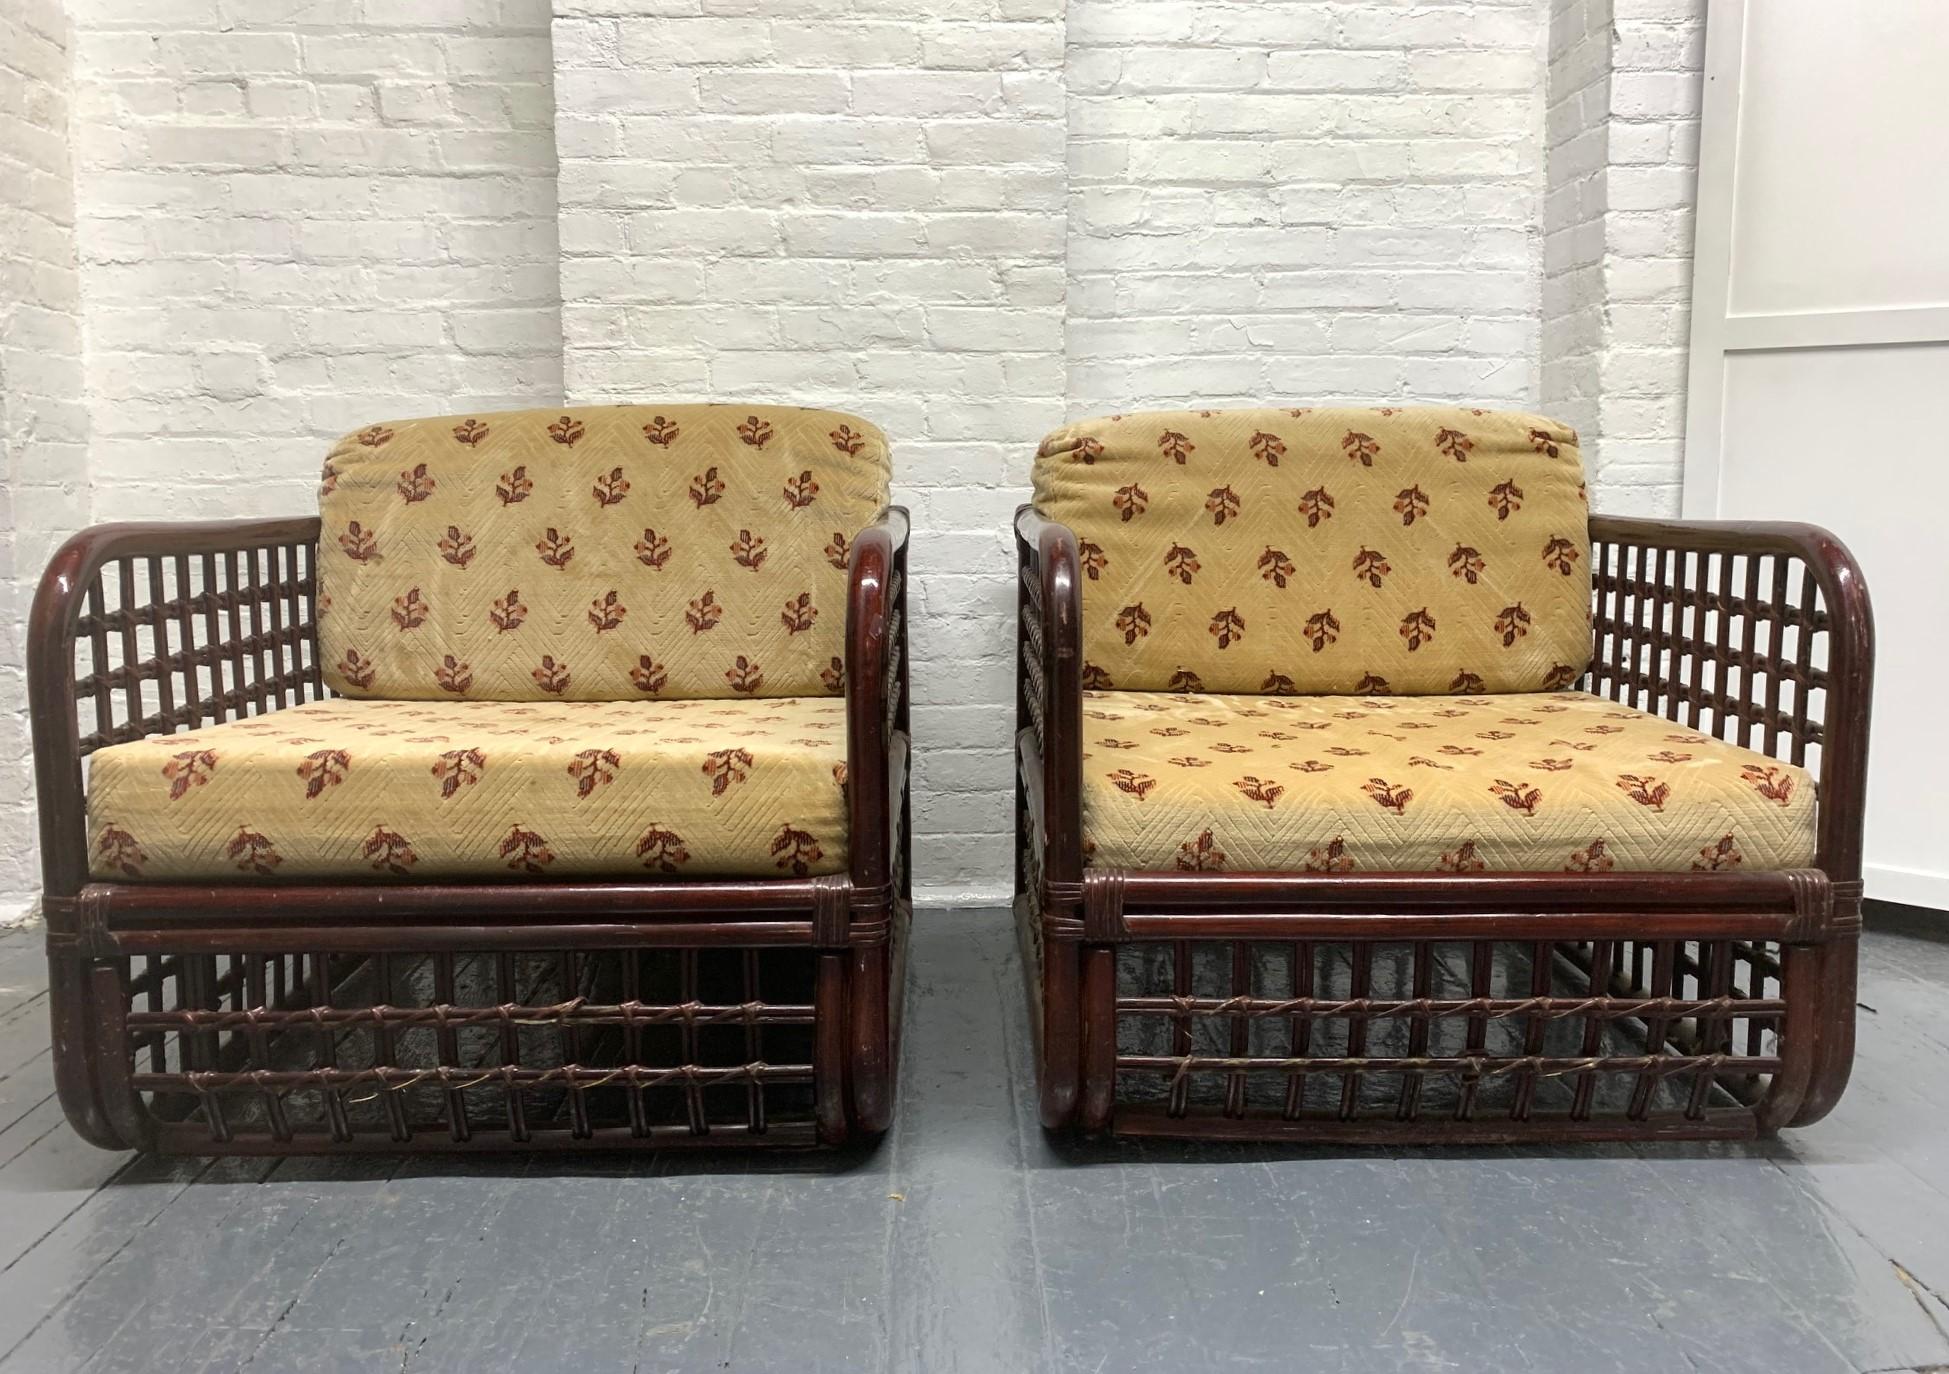 Pair of 1960s rattan lounge chairs. Cubed rattan lounge chairs with the original finish and cushions.